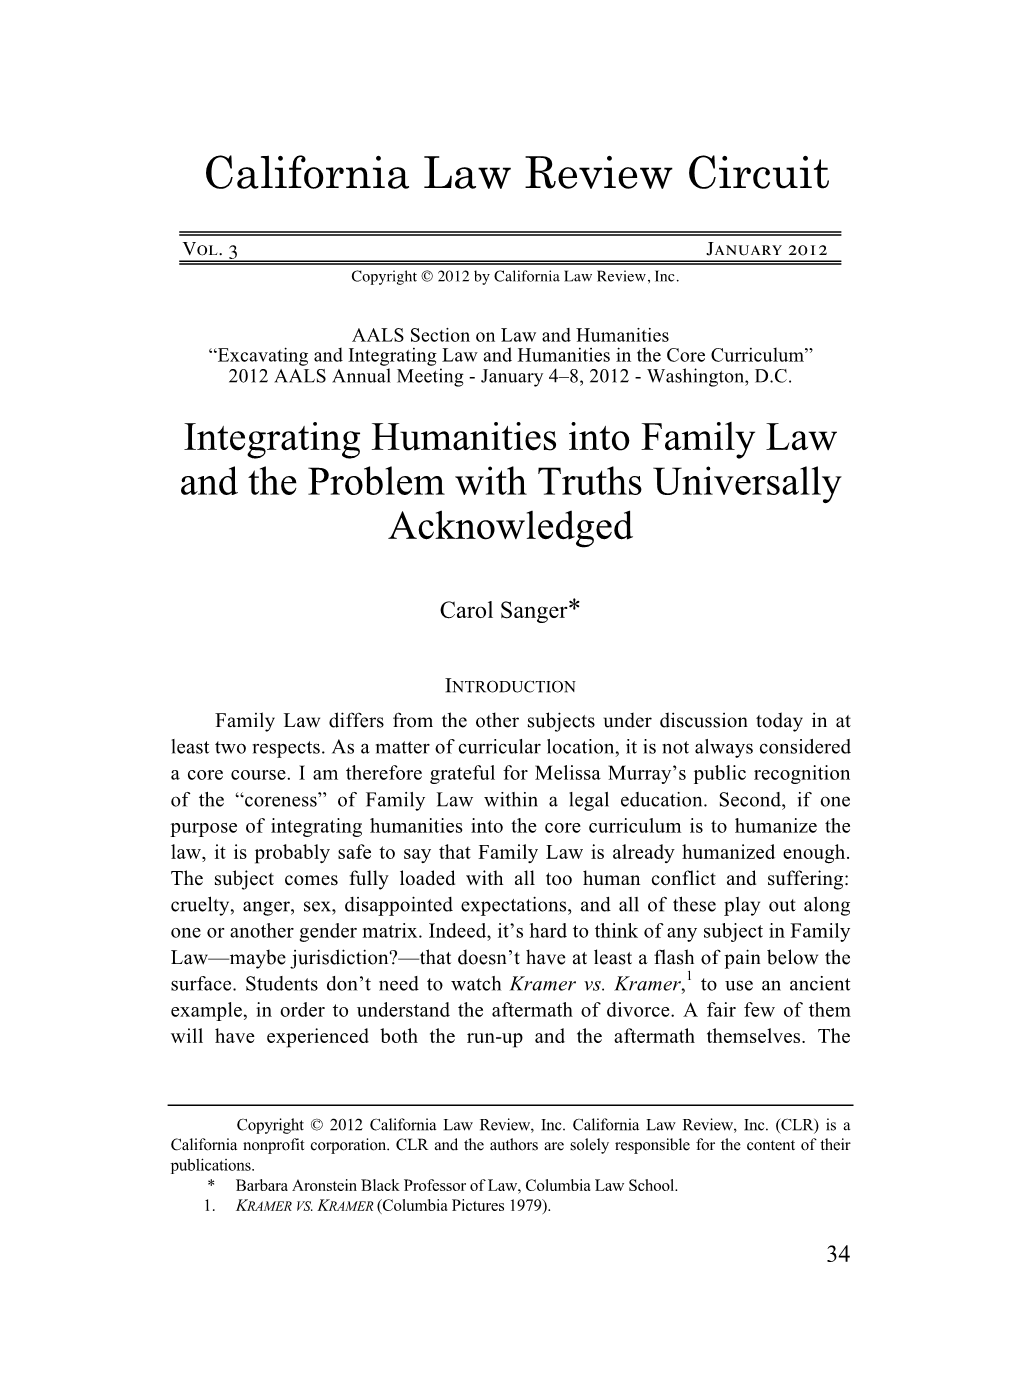 Integrating Humanities Into Family Law and the Problem with Truths Universally Acknowledged